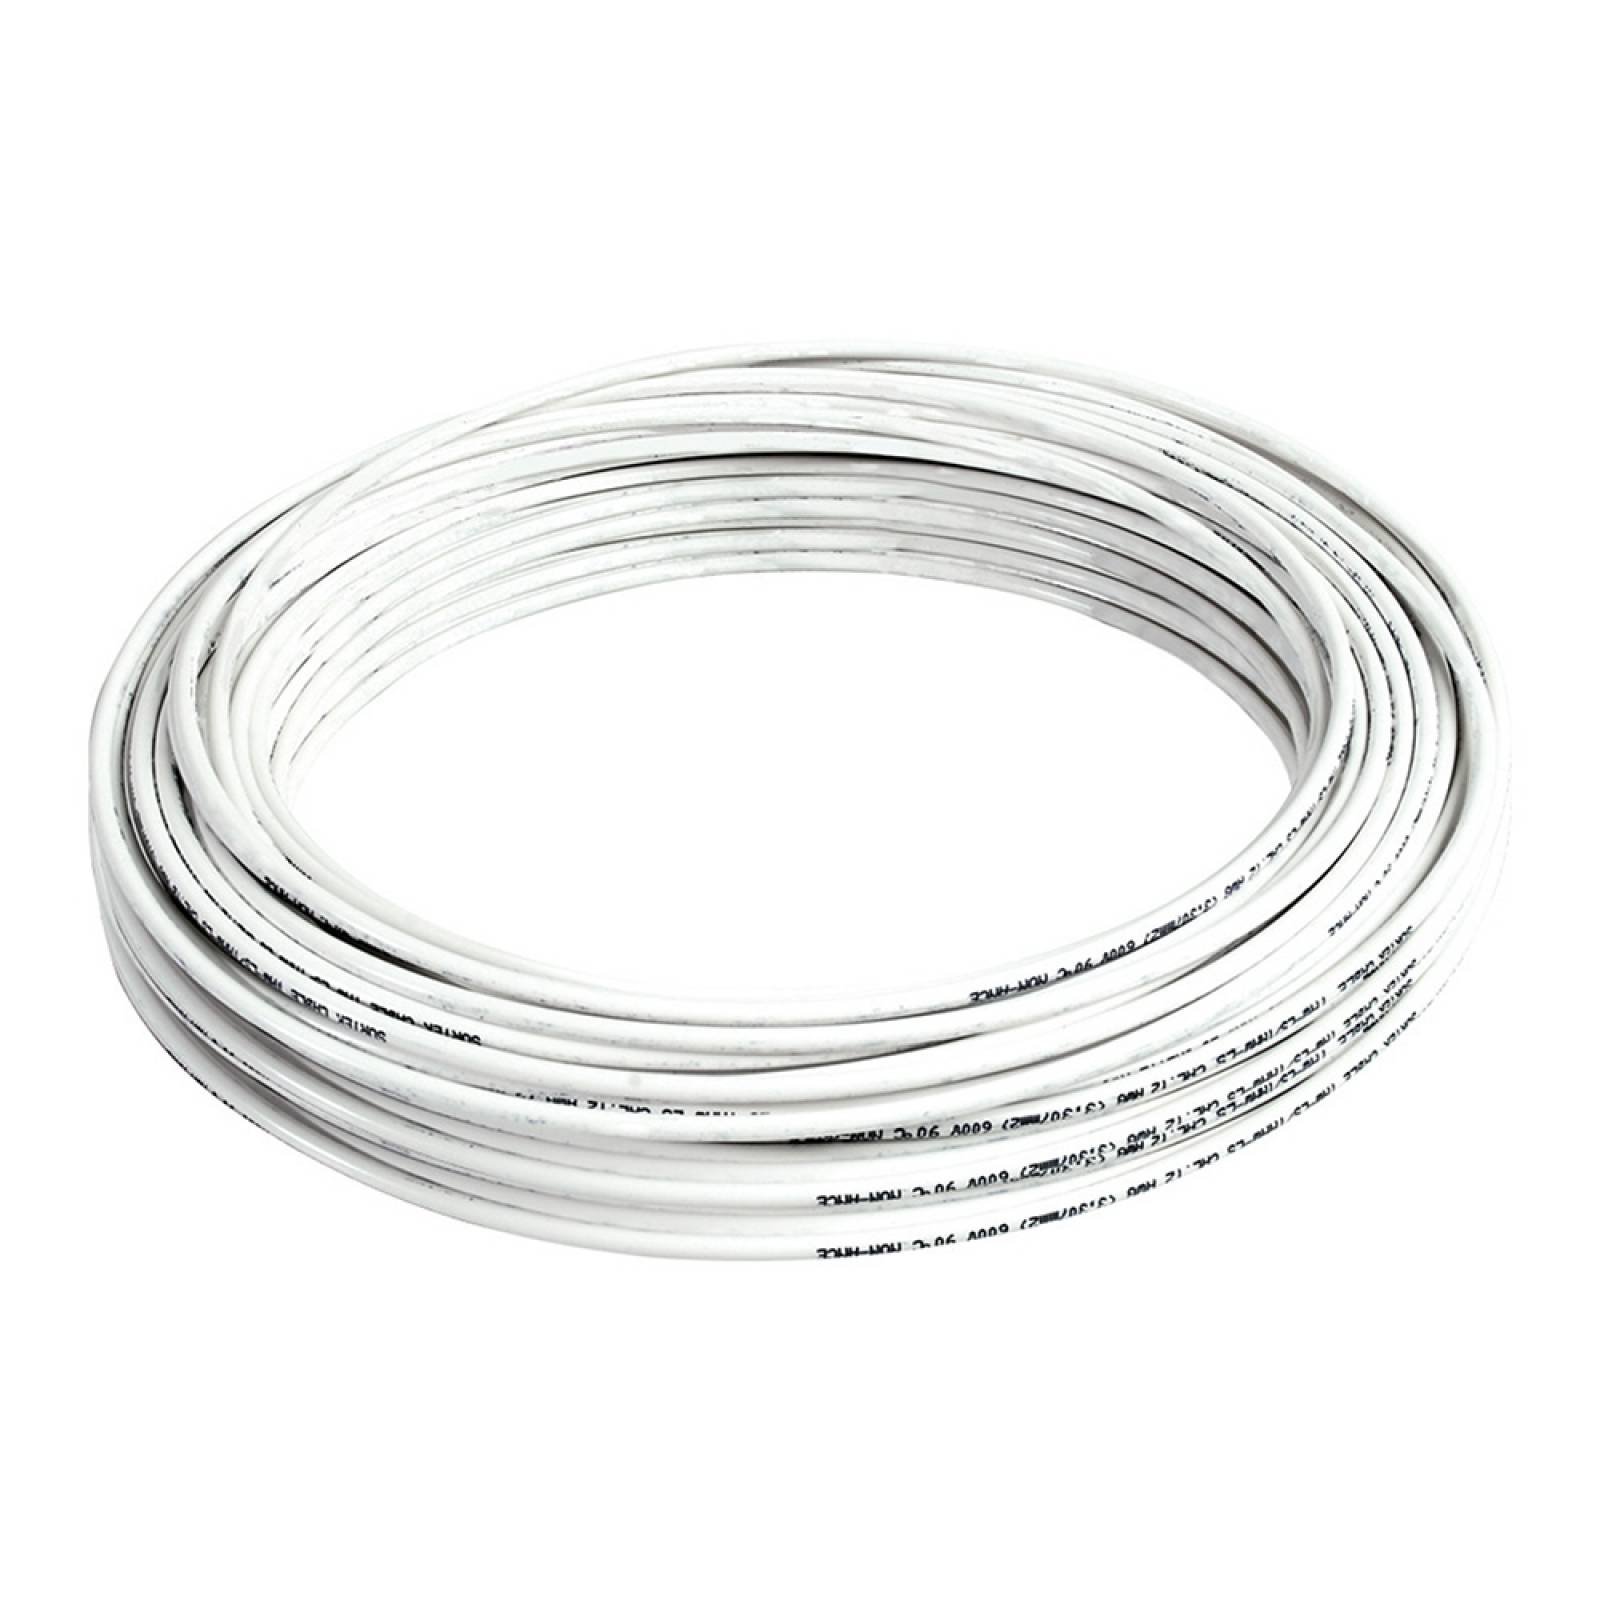 Cable Eléctrico Tipo Thw-ls/thhw-ls Cal.8 100m Blanco 136913 